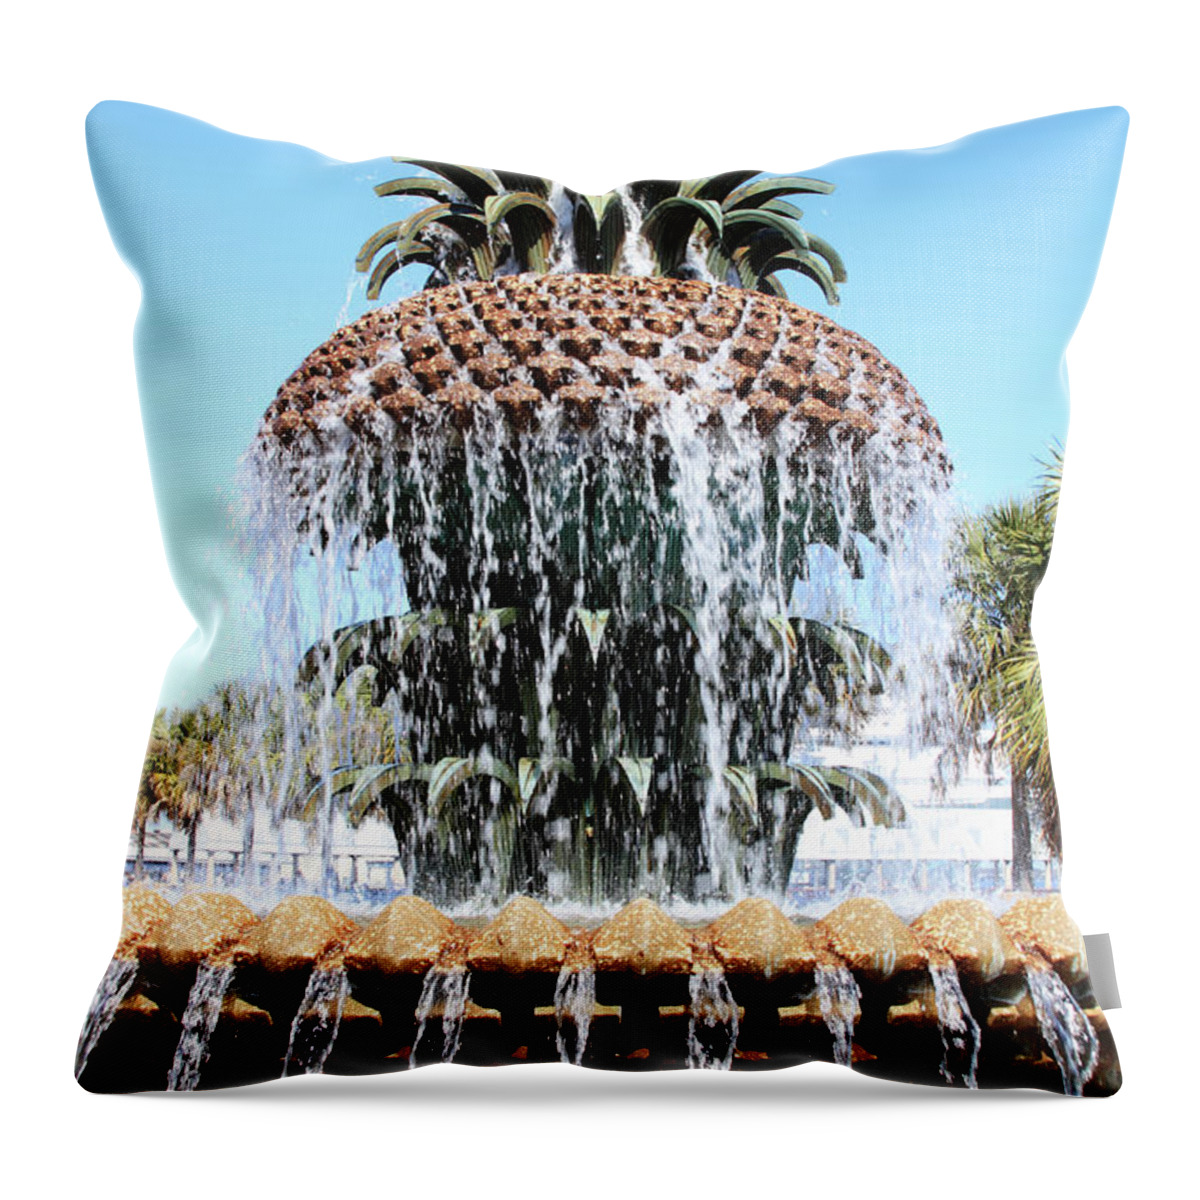 Downtown District Throw Pillow featuring the photograph Pineapple Water Fountain In Charleston by Noderog